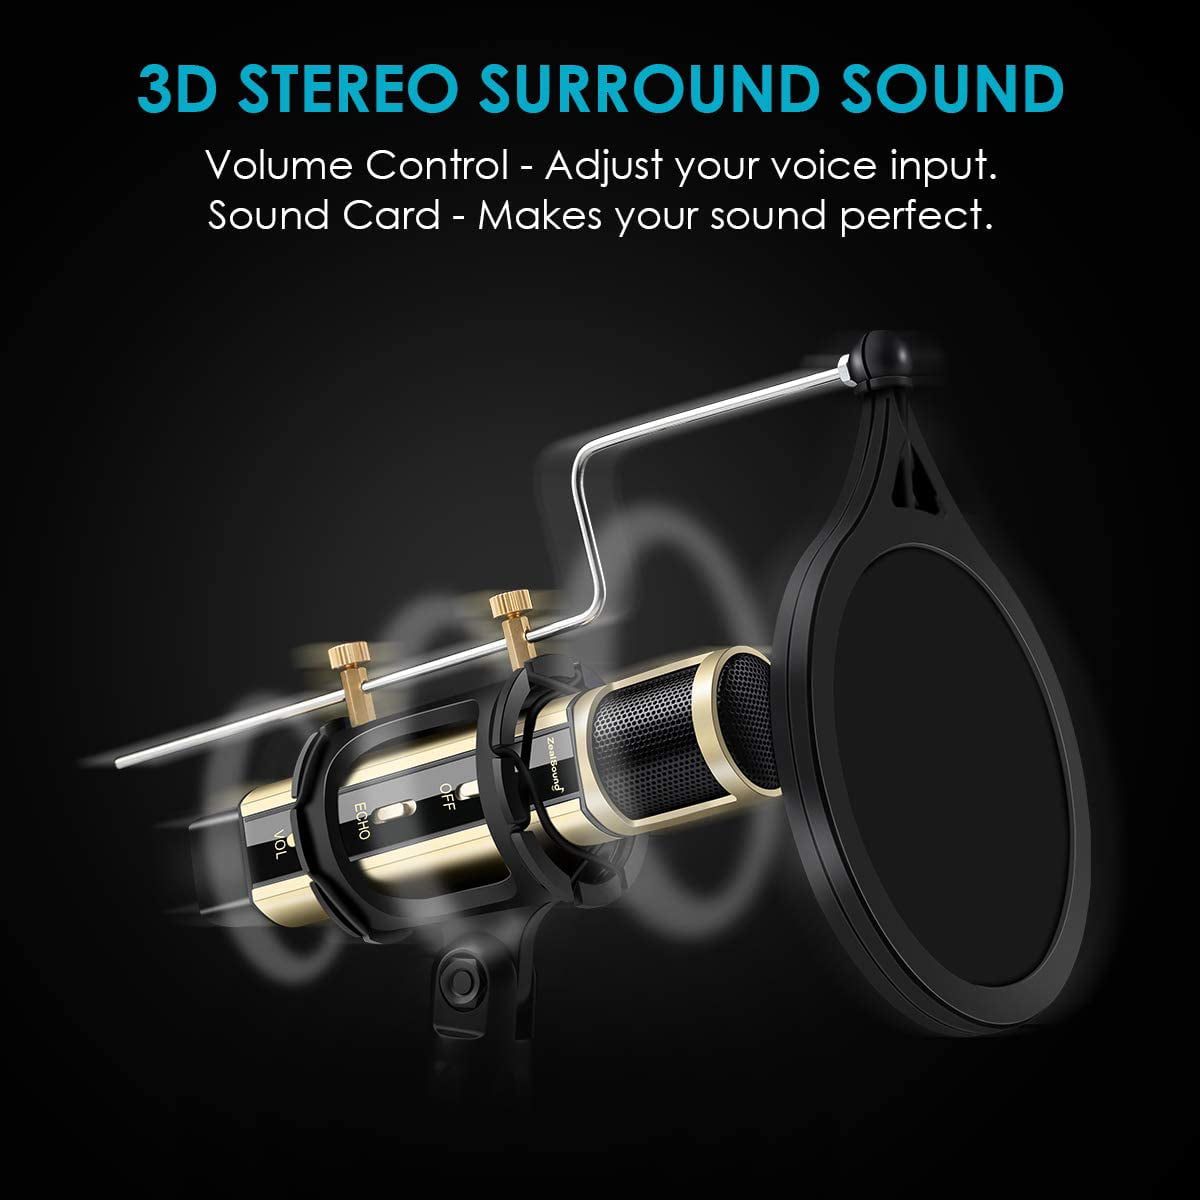 Studio Recording Microphone ZealSound Condenser Broadcast Microphone w/Stand Built-in Sound Card Echo Recording Karaoke Singing for Phone Computer PC Garageband Smule Live Stream & YouTube 